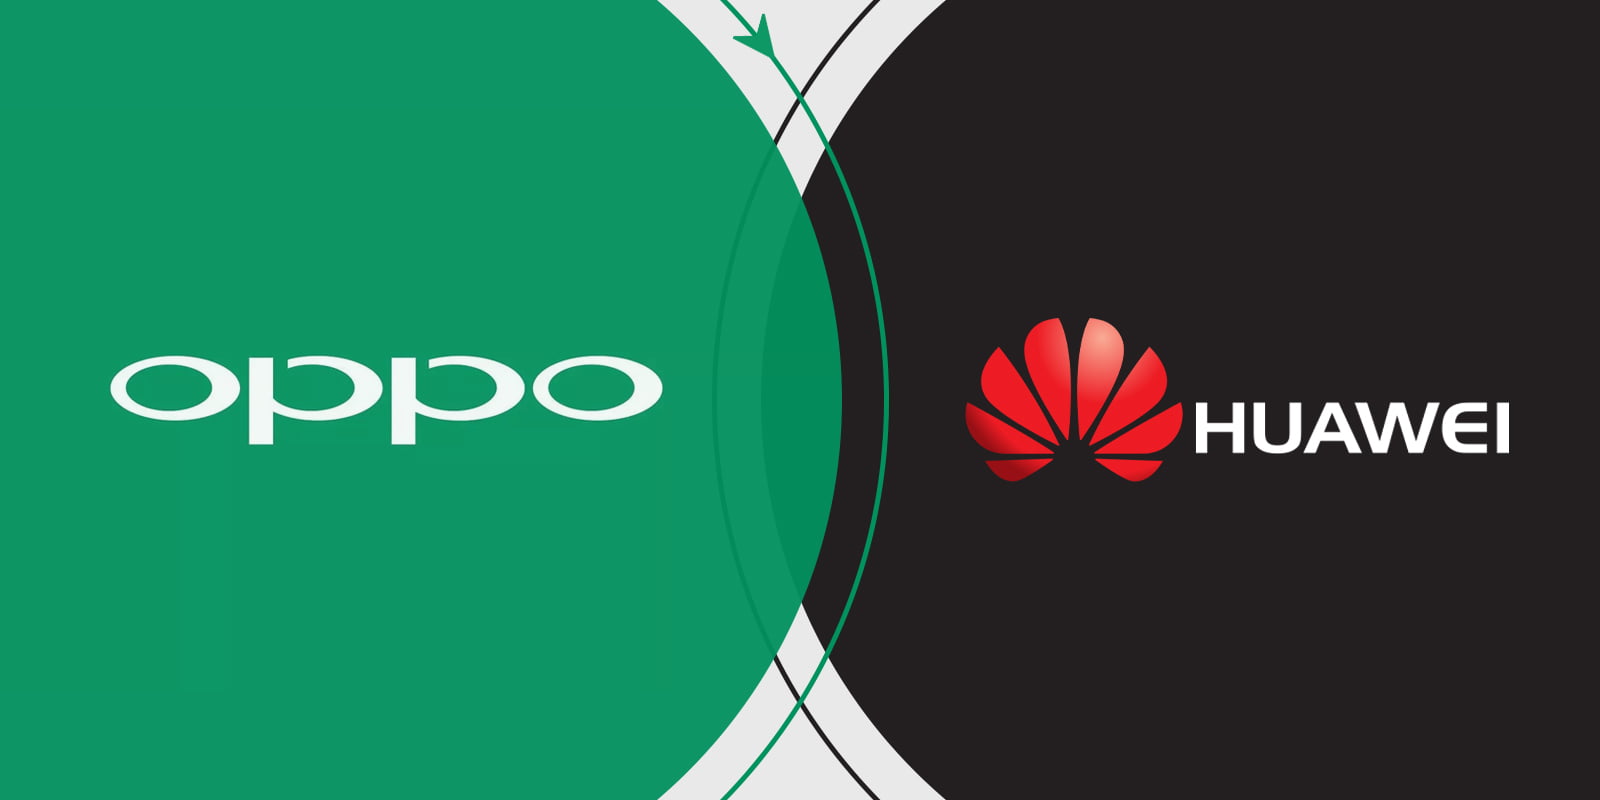 Oppo Overtakes Huawei To Become Best Selling Brand In China